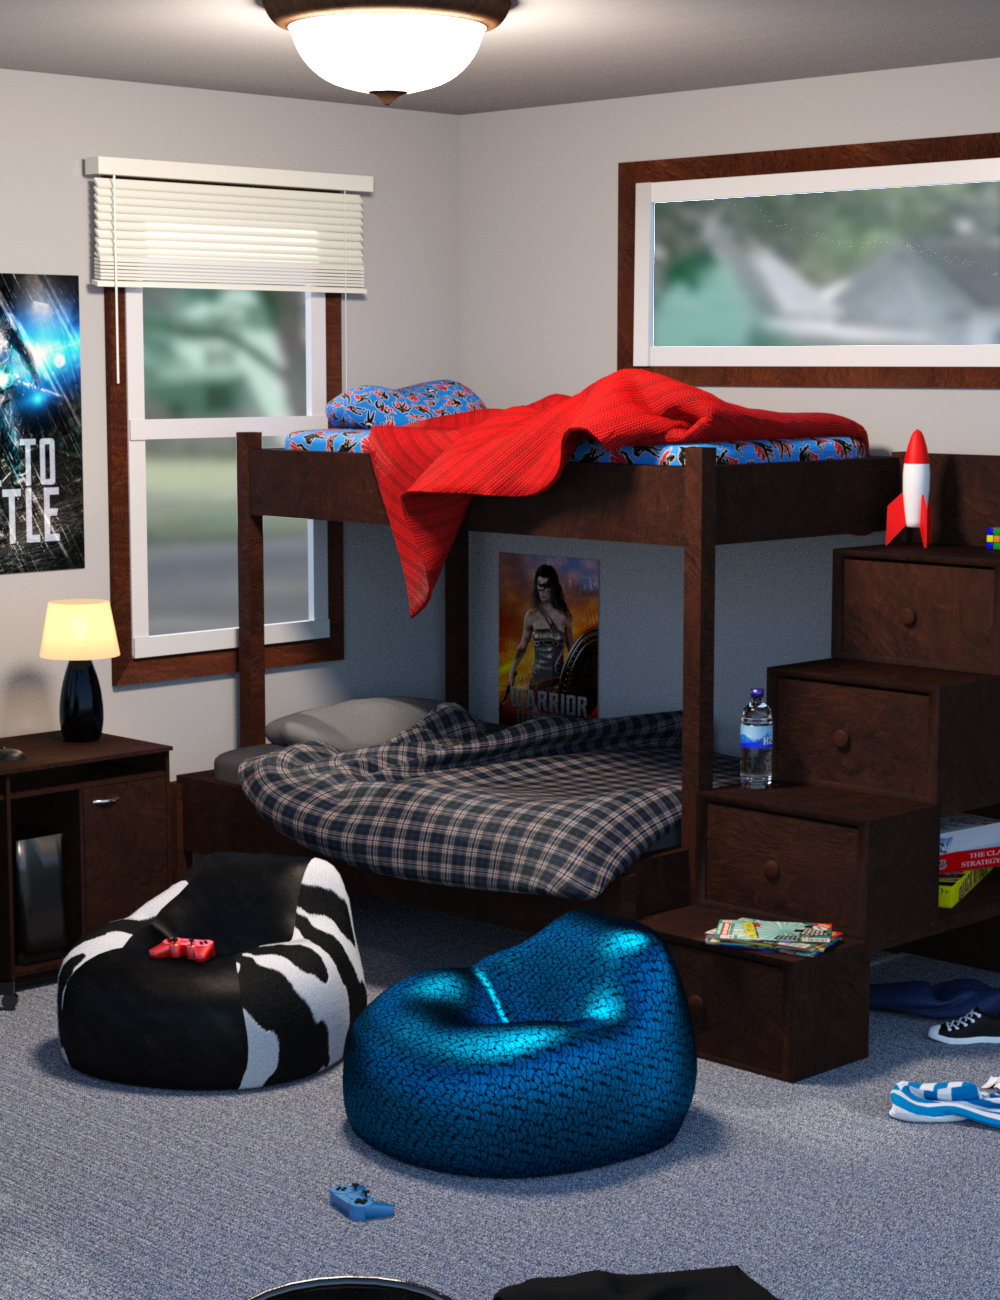 The Boys' Room by: SR3, 3D Models by Daz 3D